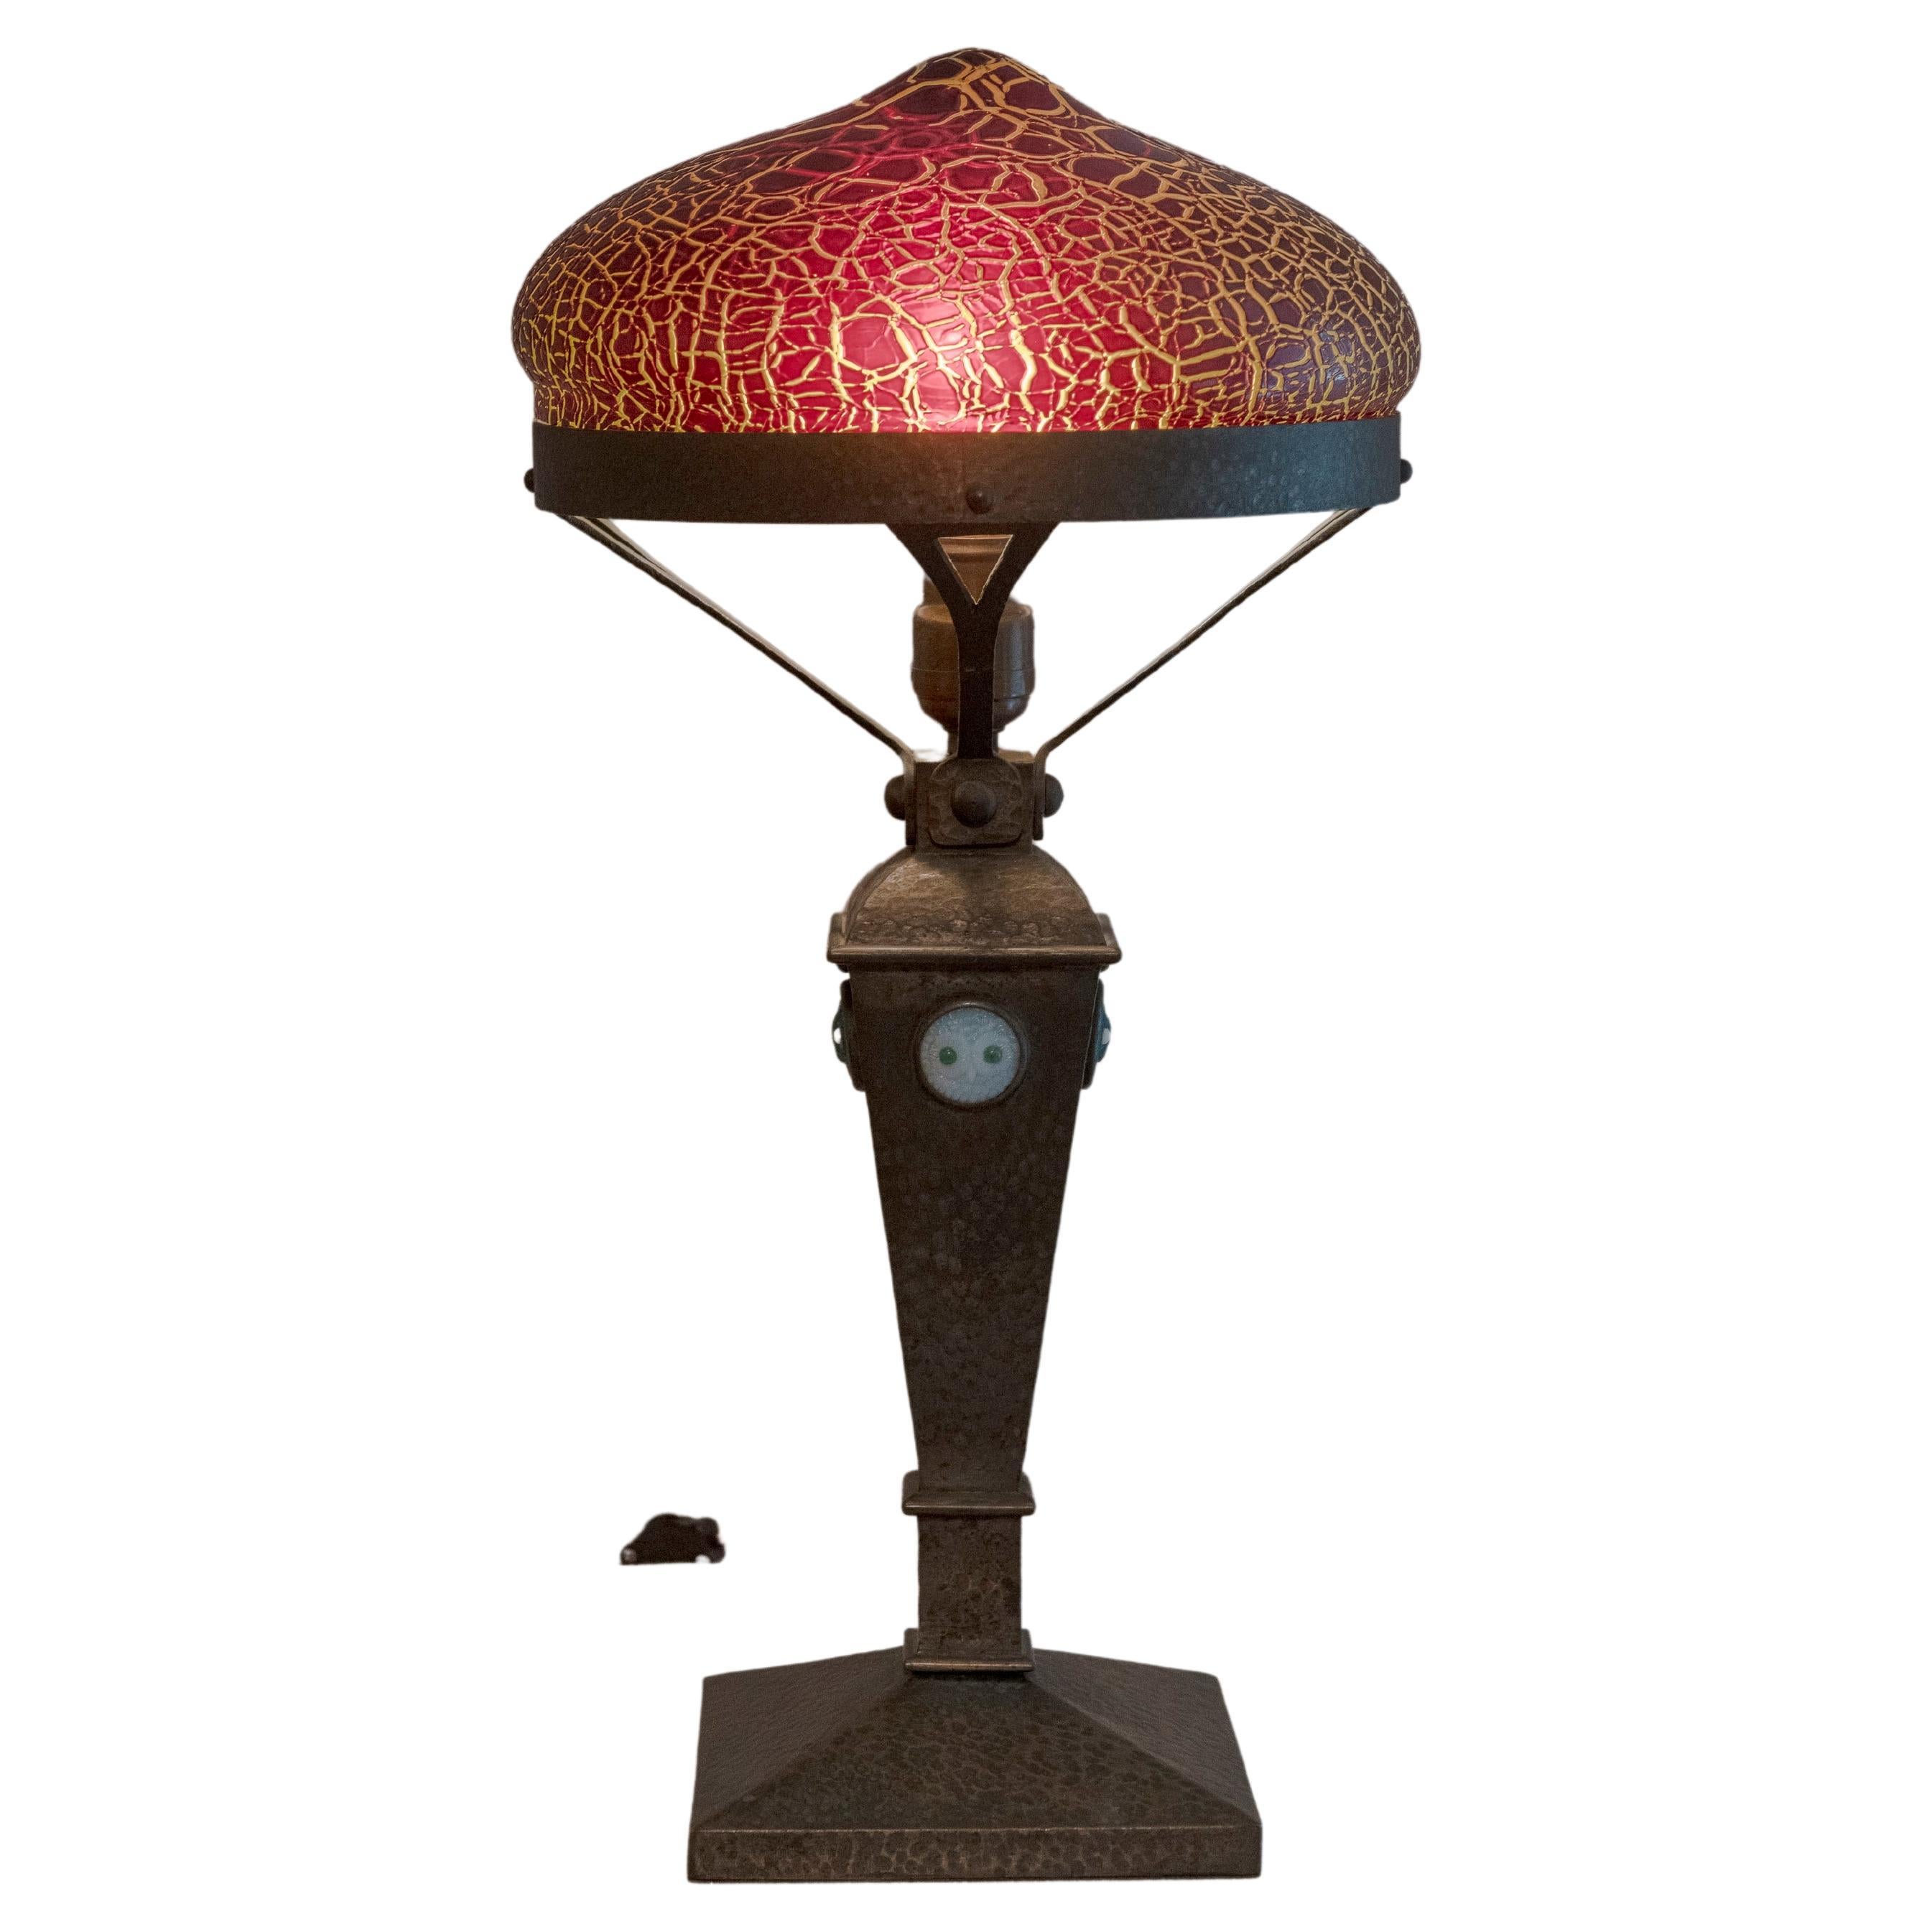 Austrian, Arts & Crafts Table Lamp, Red Shade, w/Owl Faces in Jewels ca. 1910